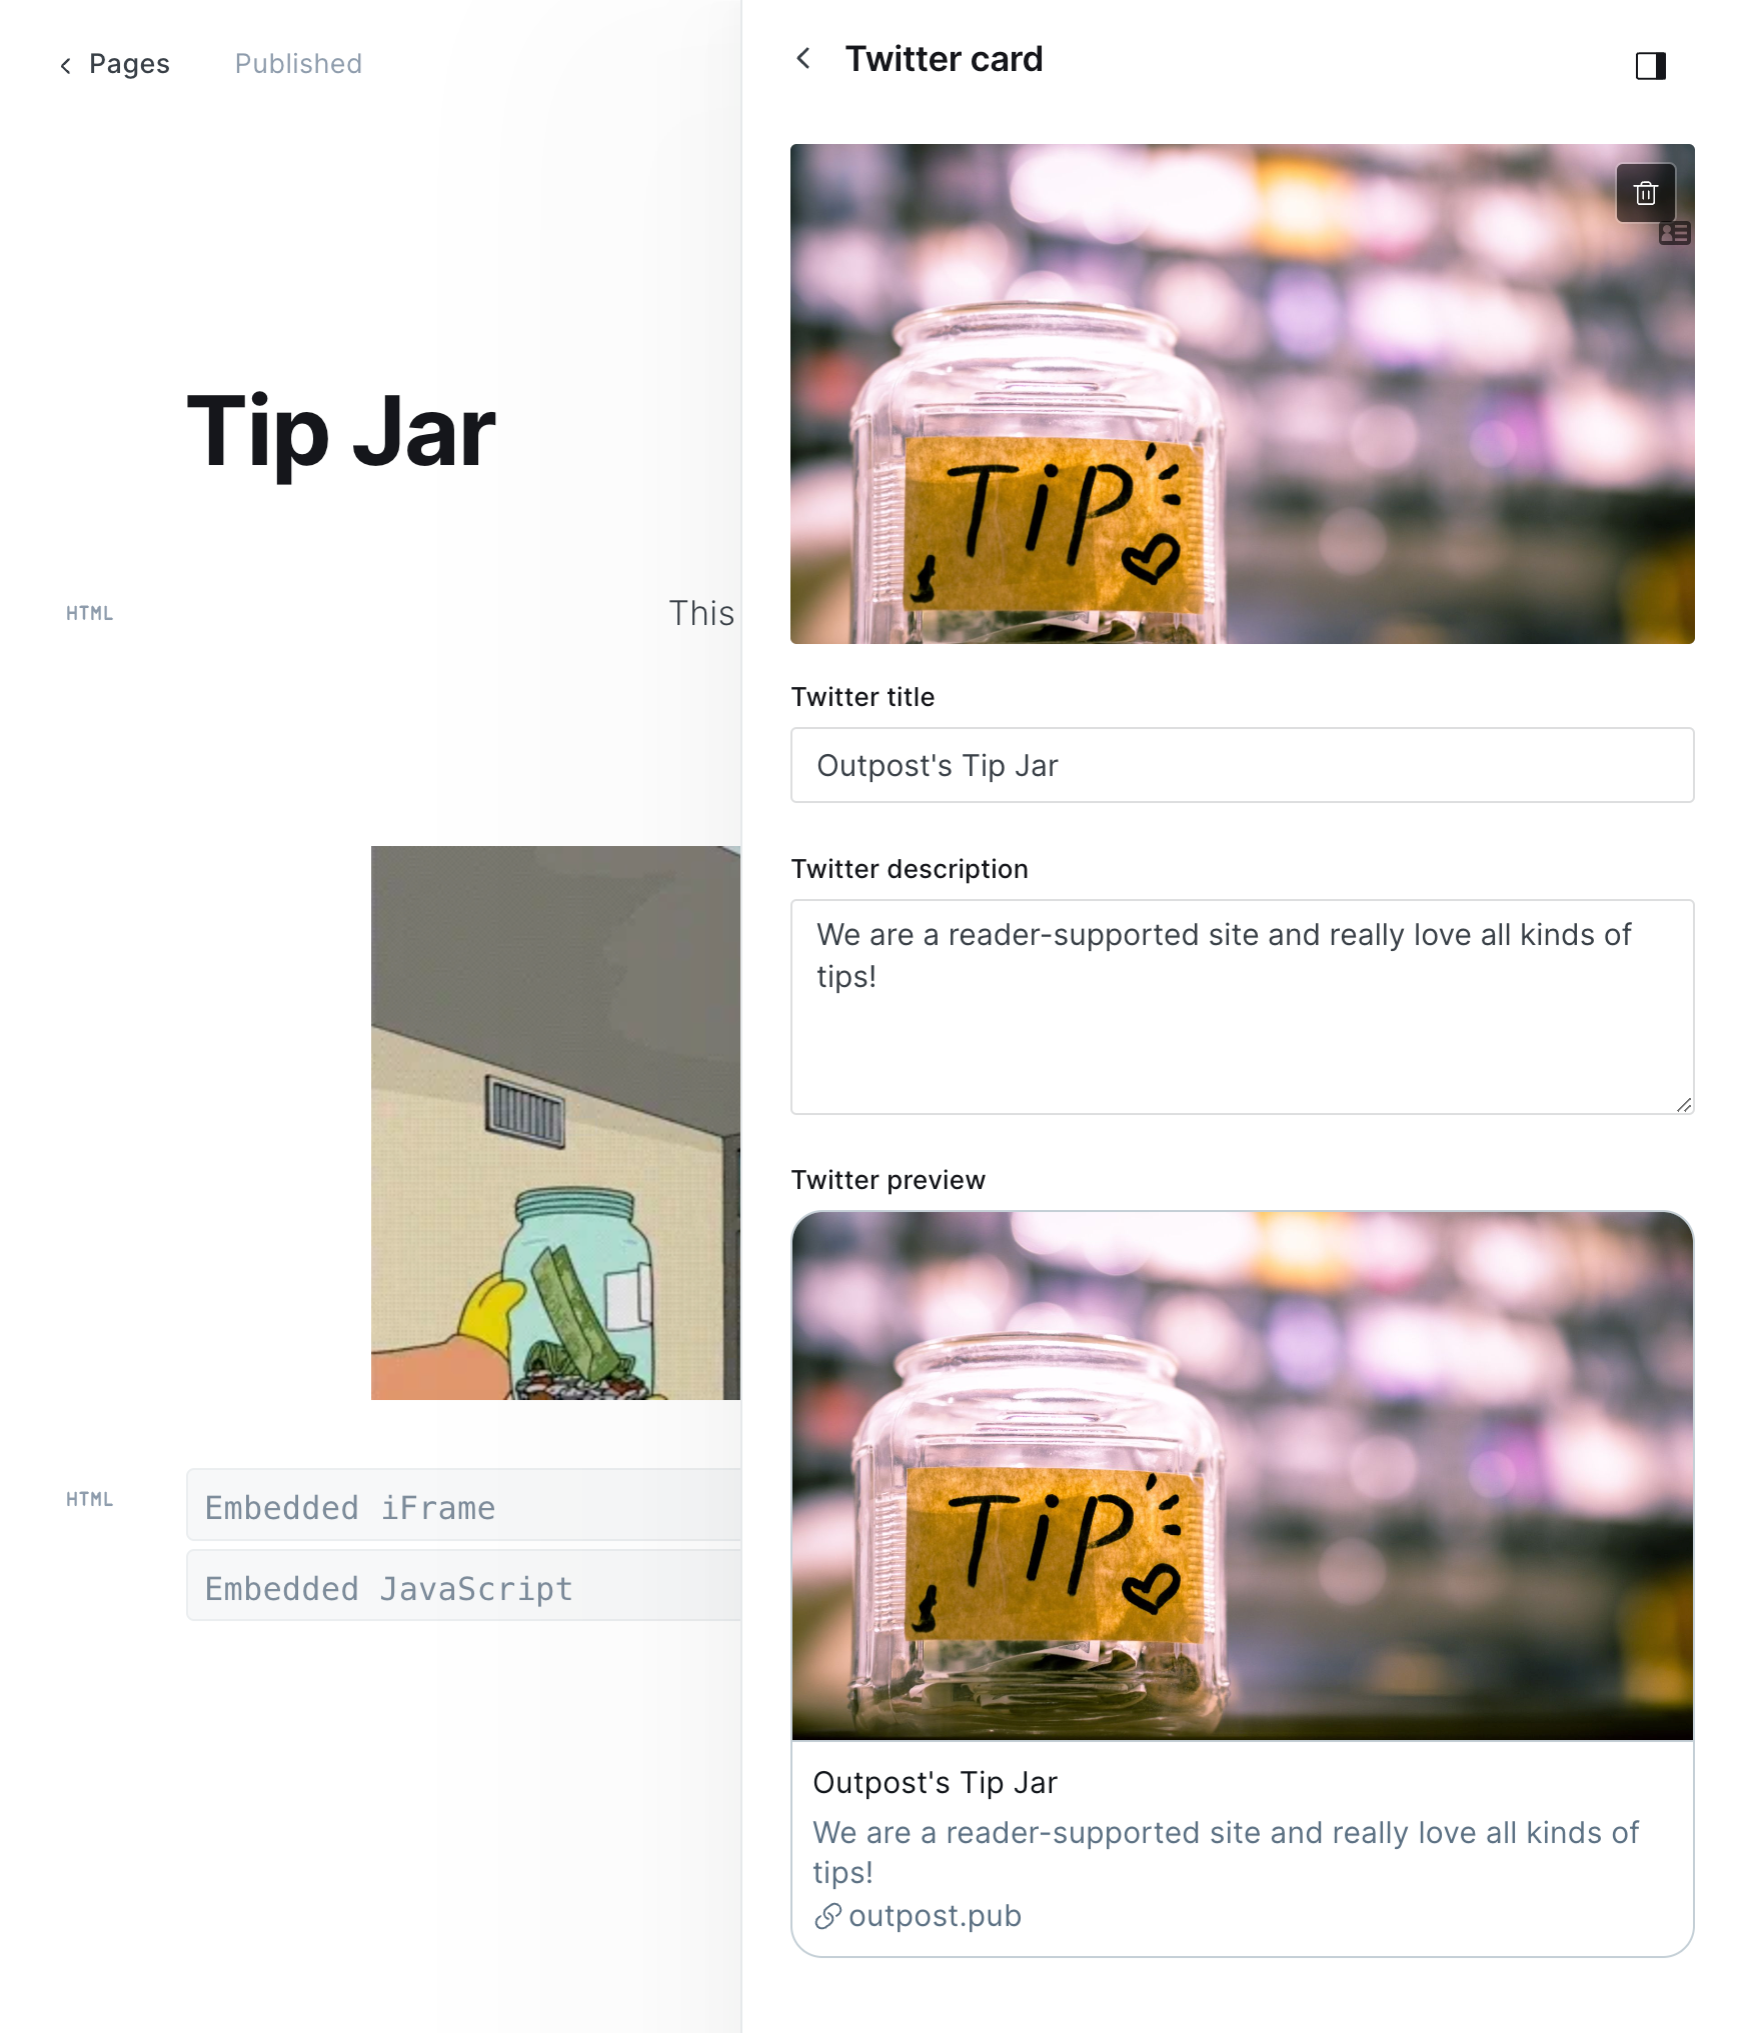 Screenshot of setting up Twitter sharing details for the Outpost Tip Jar